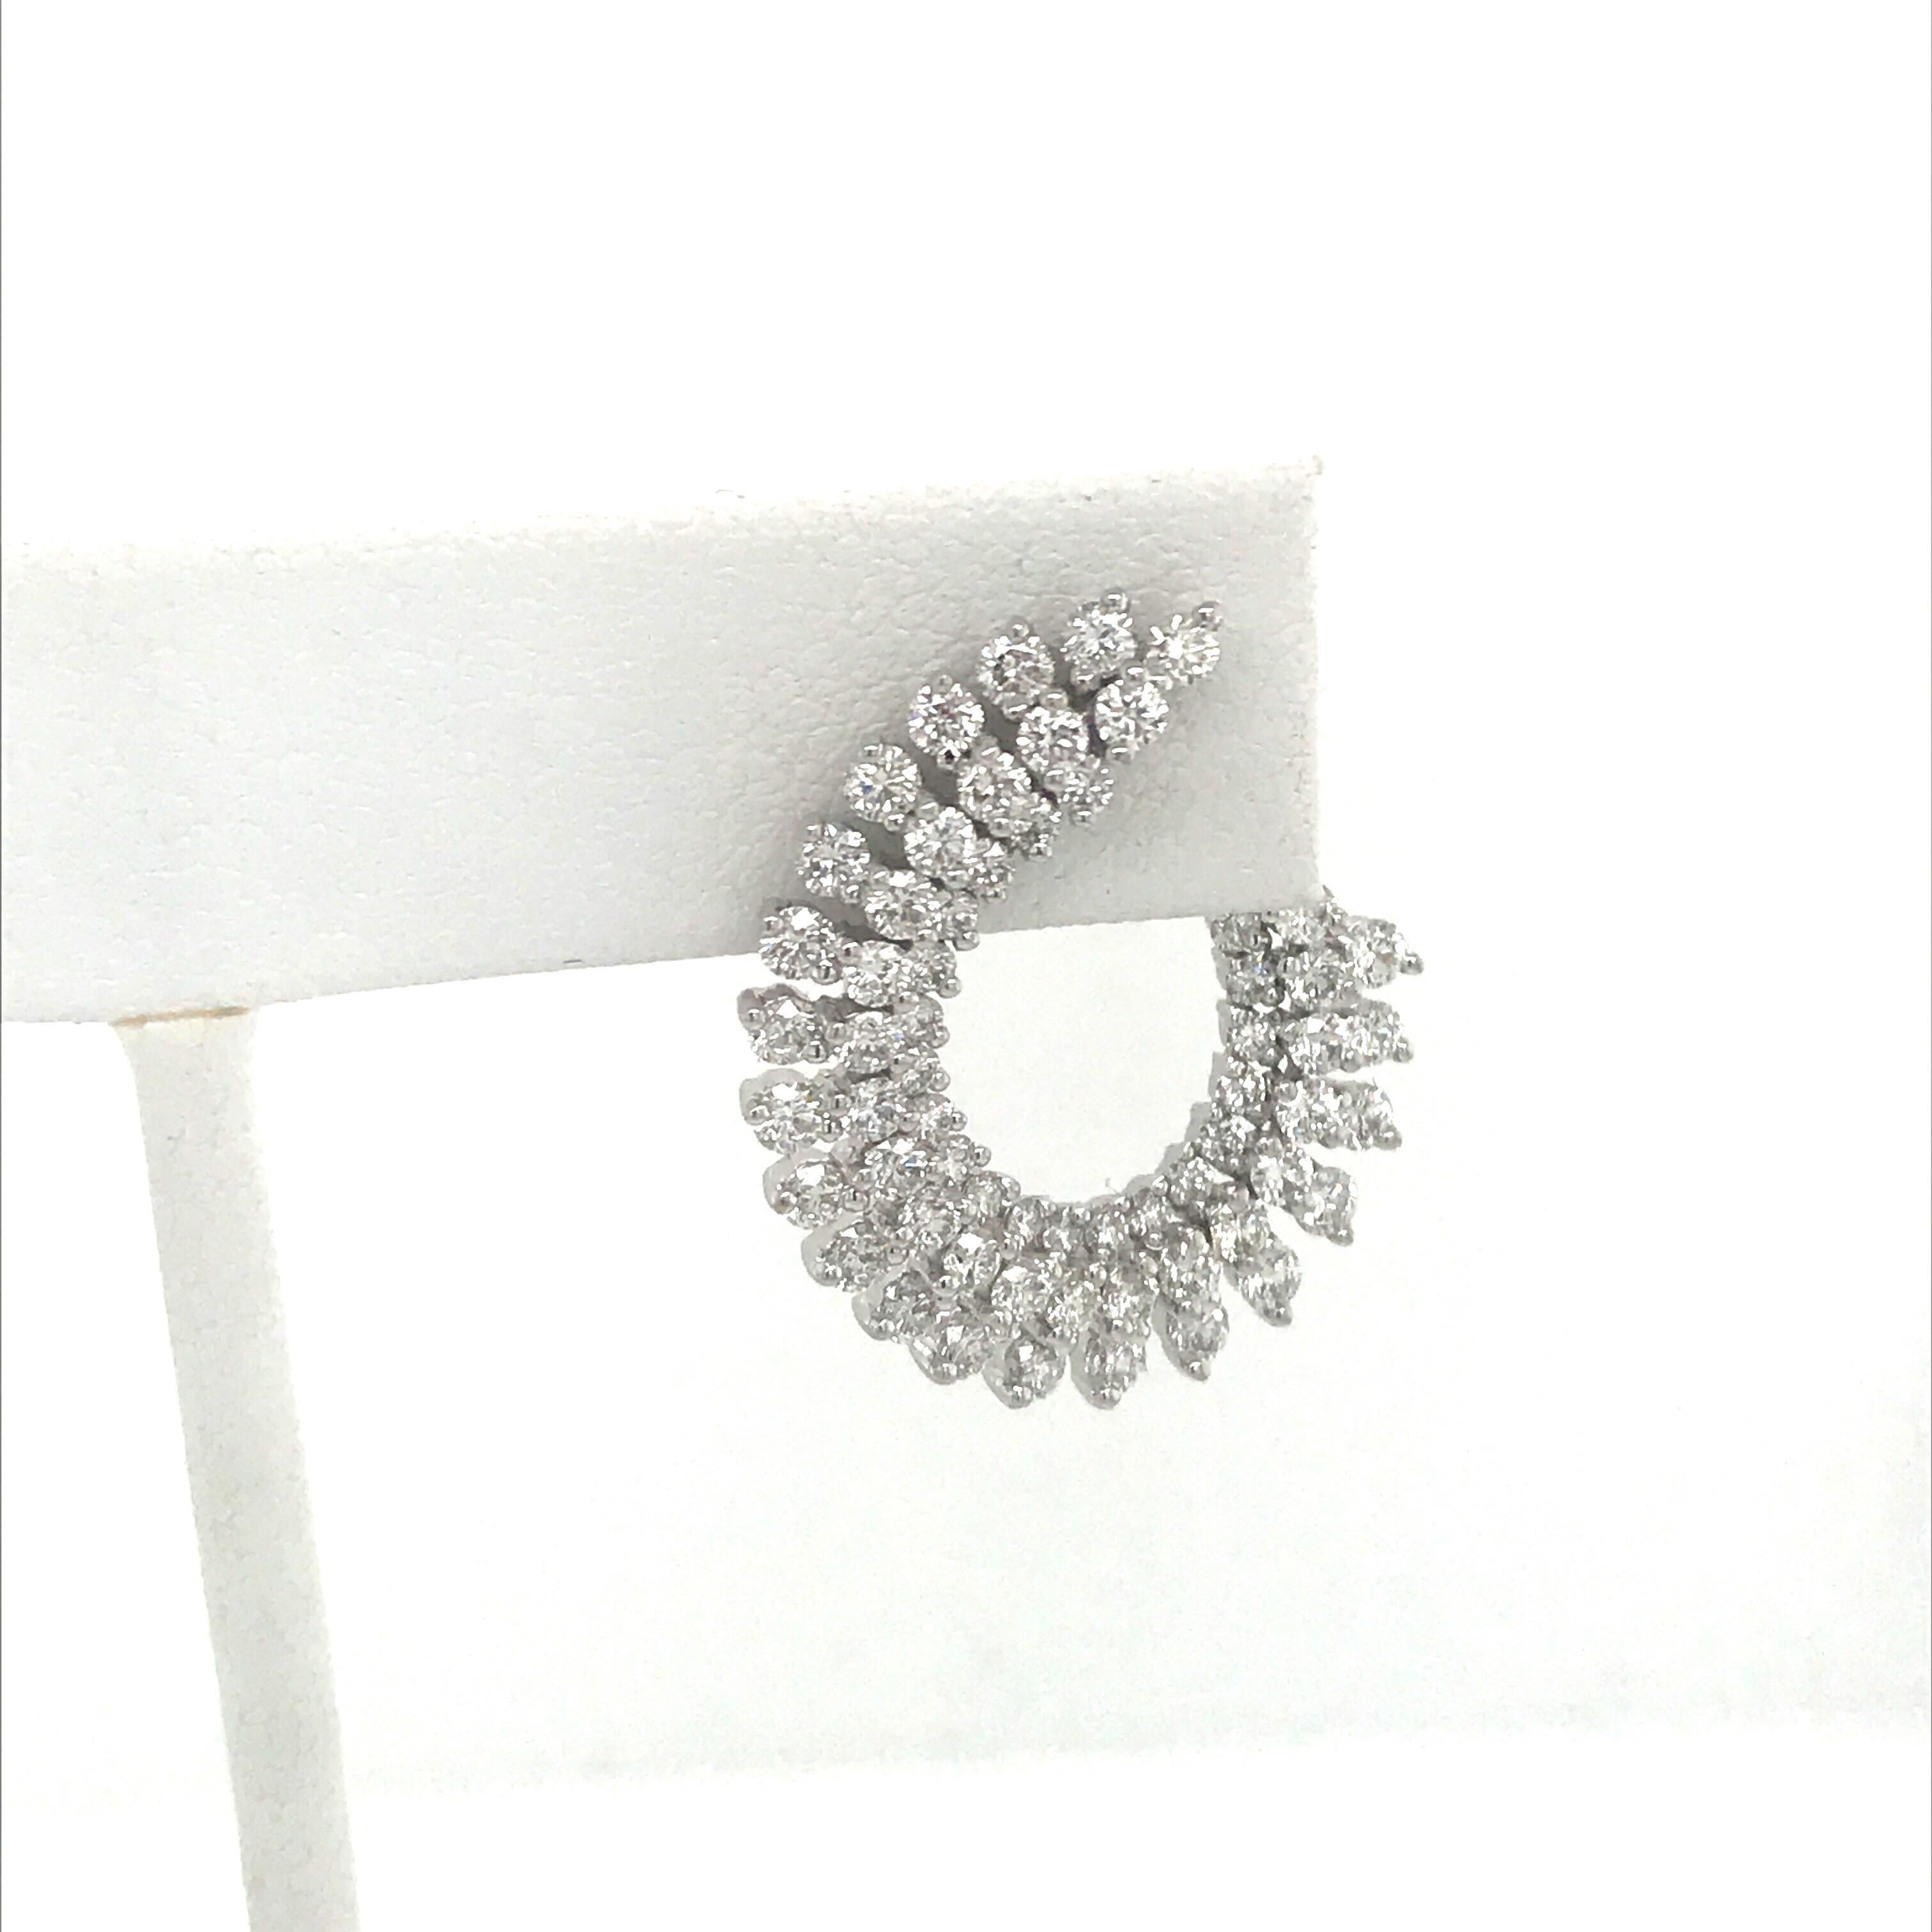 18K White gold earrings featuring 164 round brilliants weighing 3.87 carats. 
Color G-H
Clarity SI